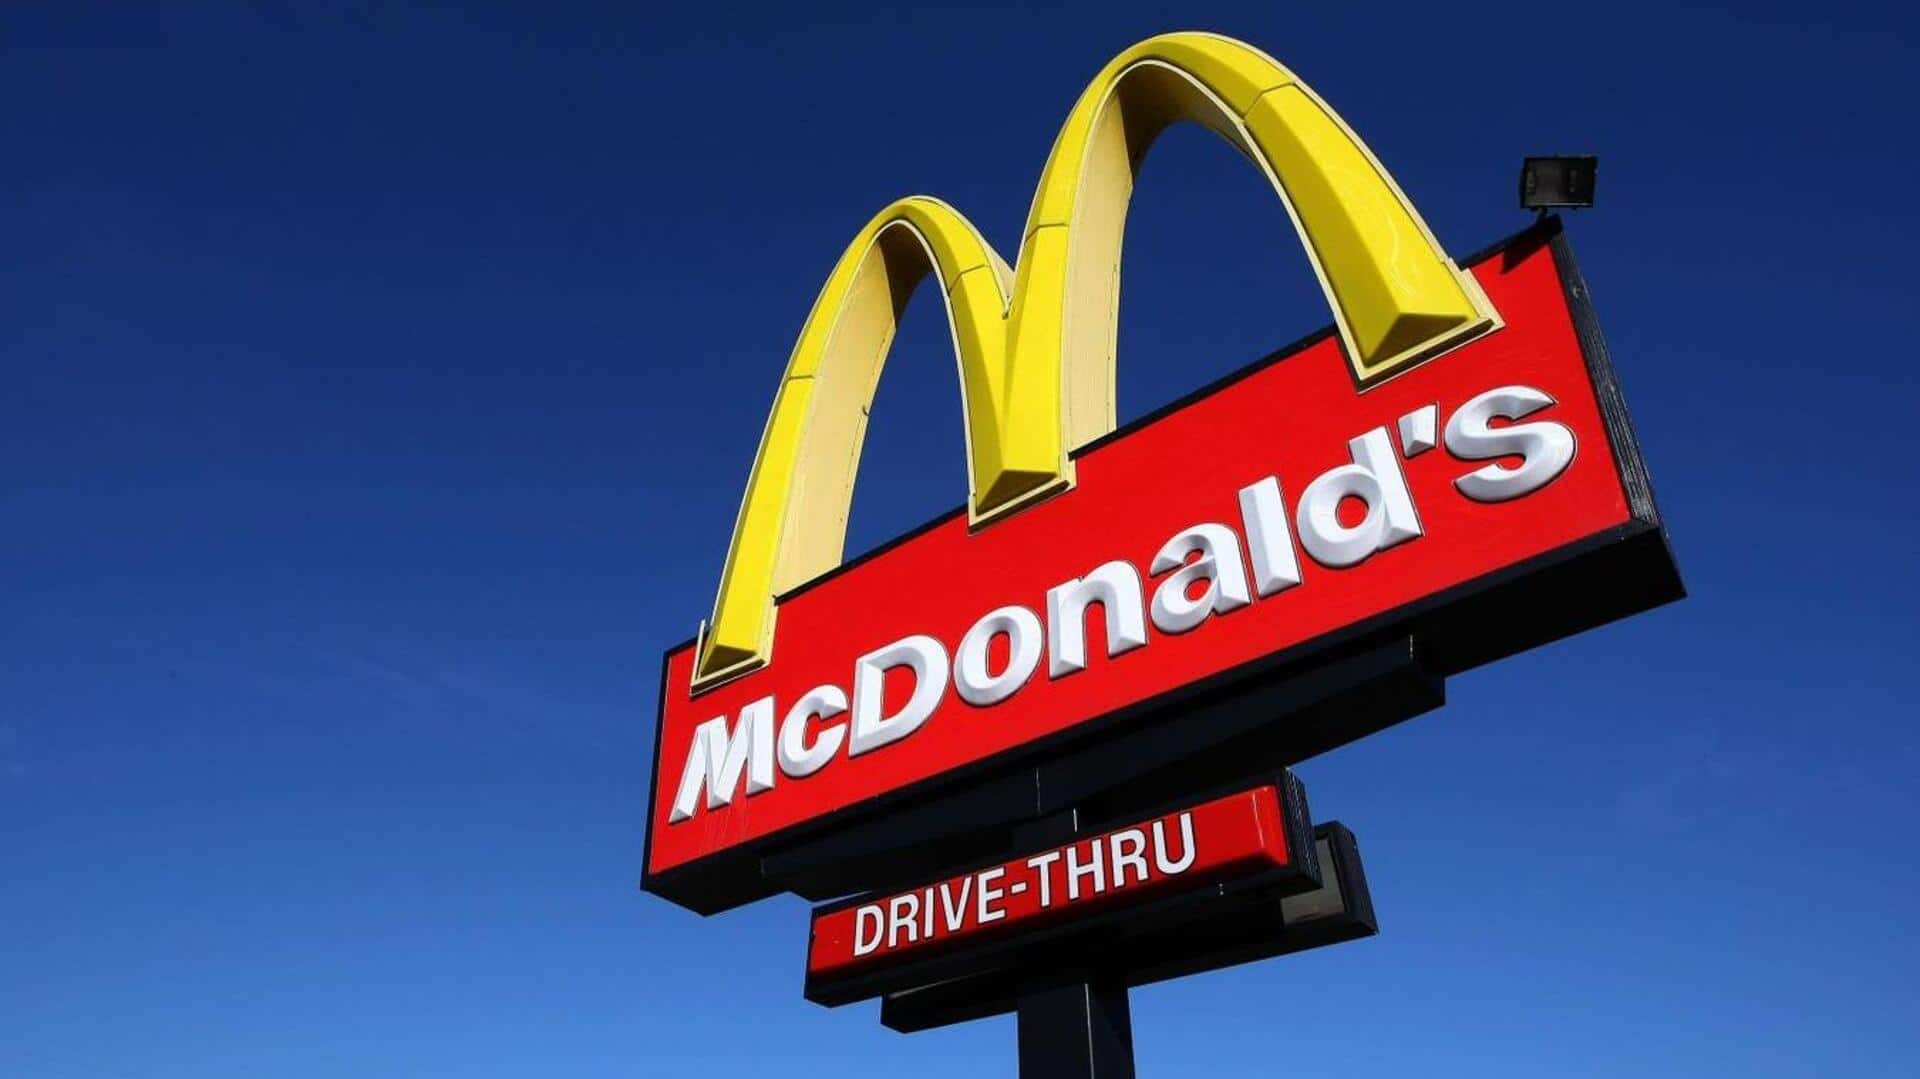 McDonald's outage disrupts service in multiple countries including UK, Japan